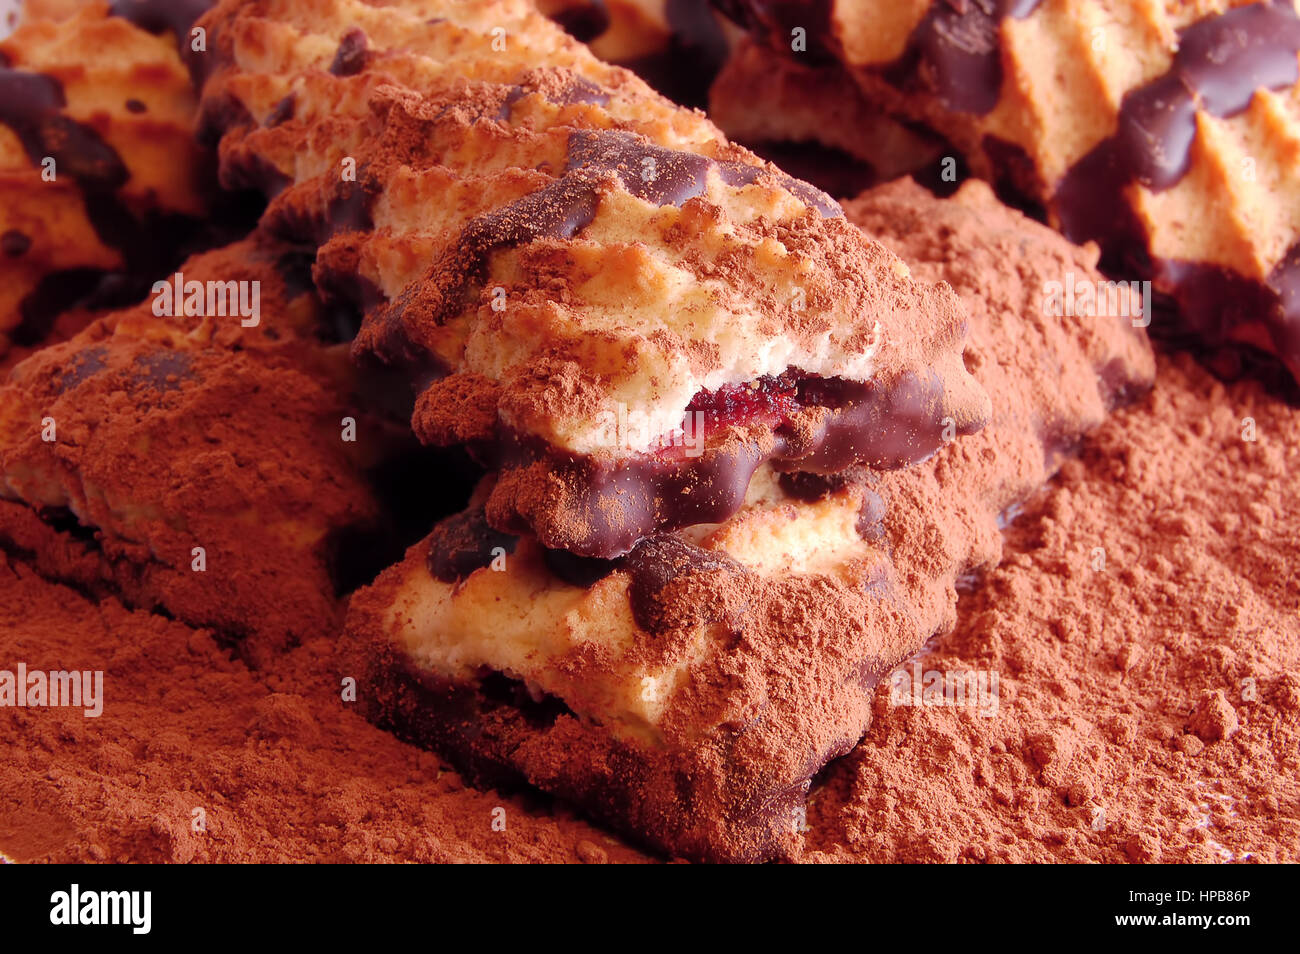 Pile of shortbread cookies with jam and chocolate icing on the scattered cocoa powder close up. Stock Photo